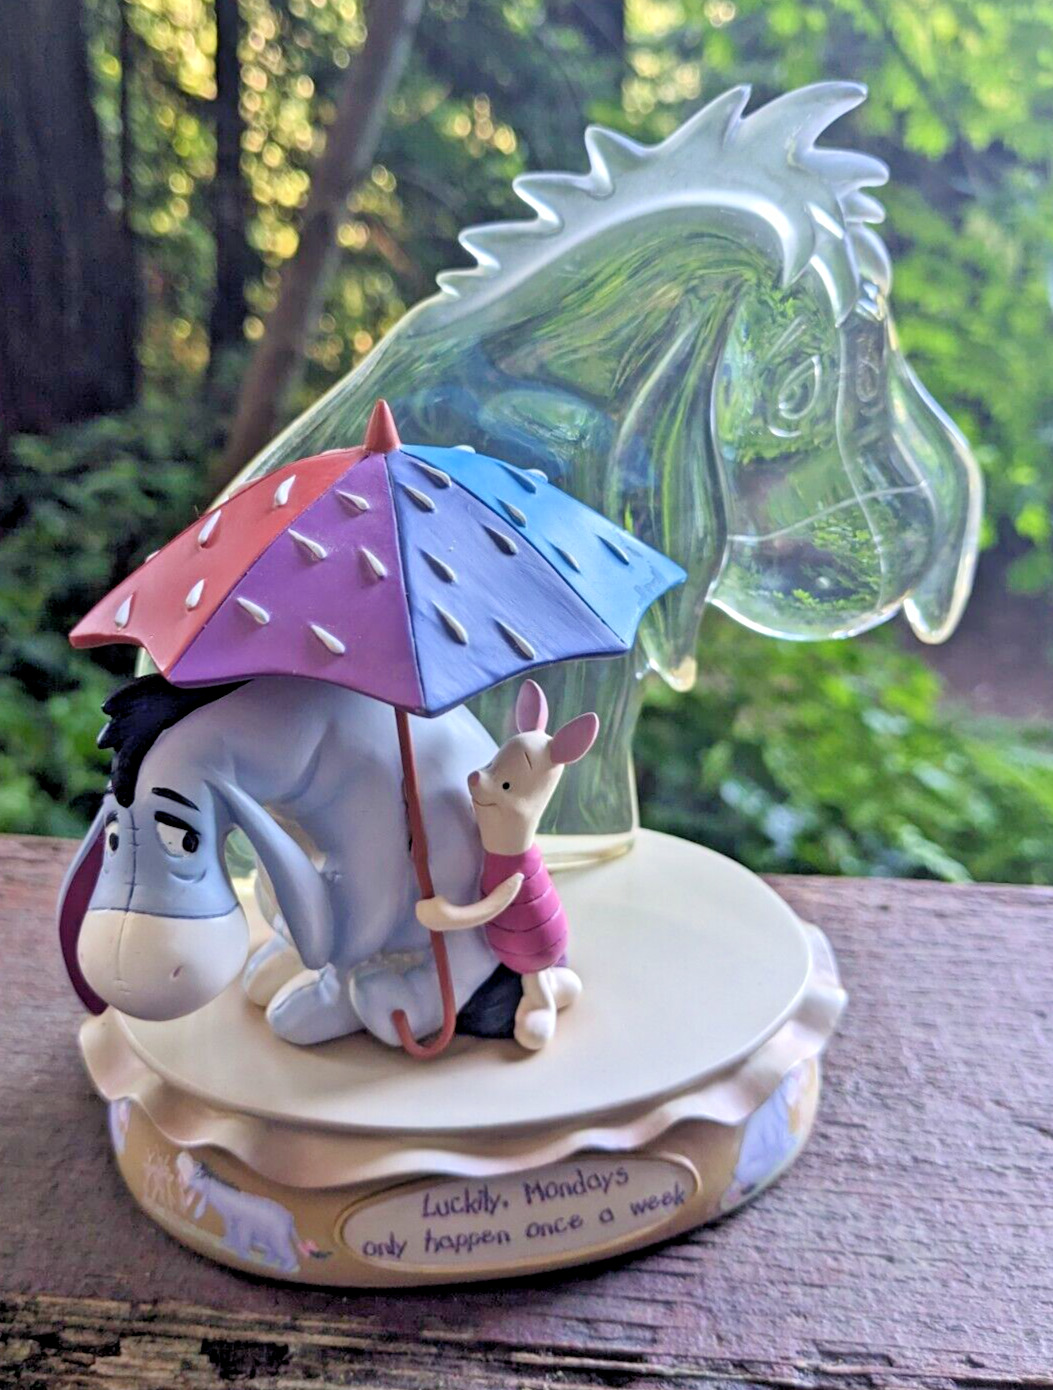 Disney Eeyore Luckily Mondays Only Happen Once A Week Limited Edition Bradford 